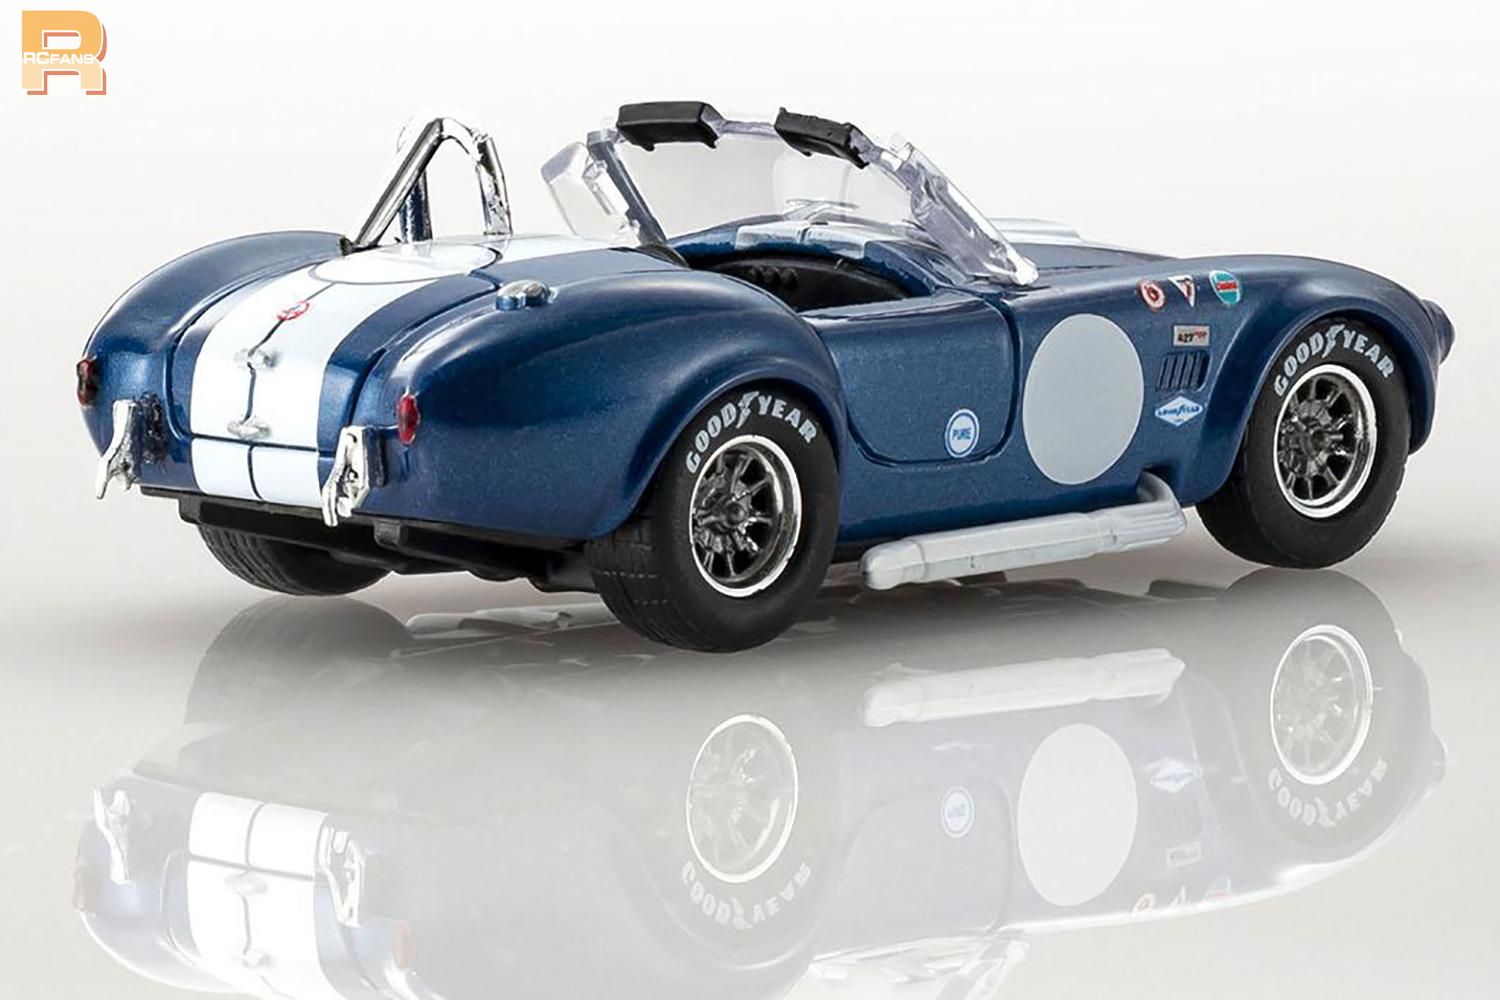 RCFans KYOSHO MINI CAR & BOOK Shelby Cobra - Powered by Discuz!